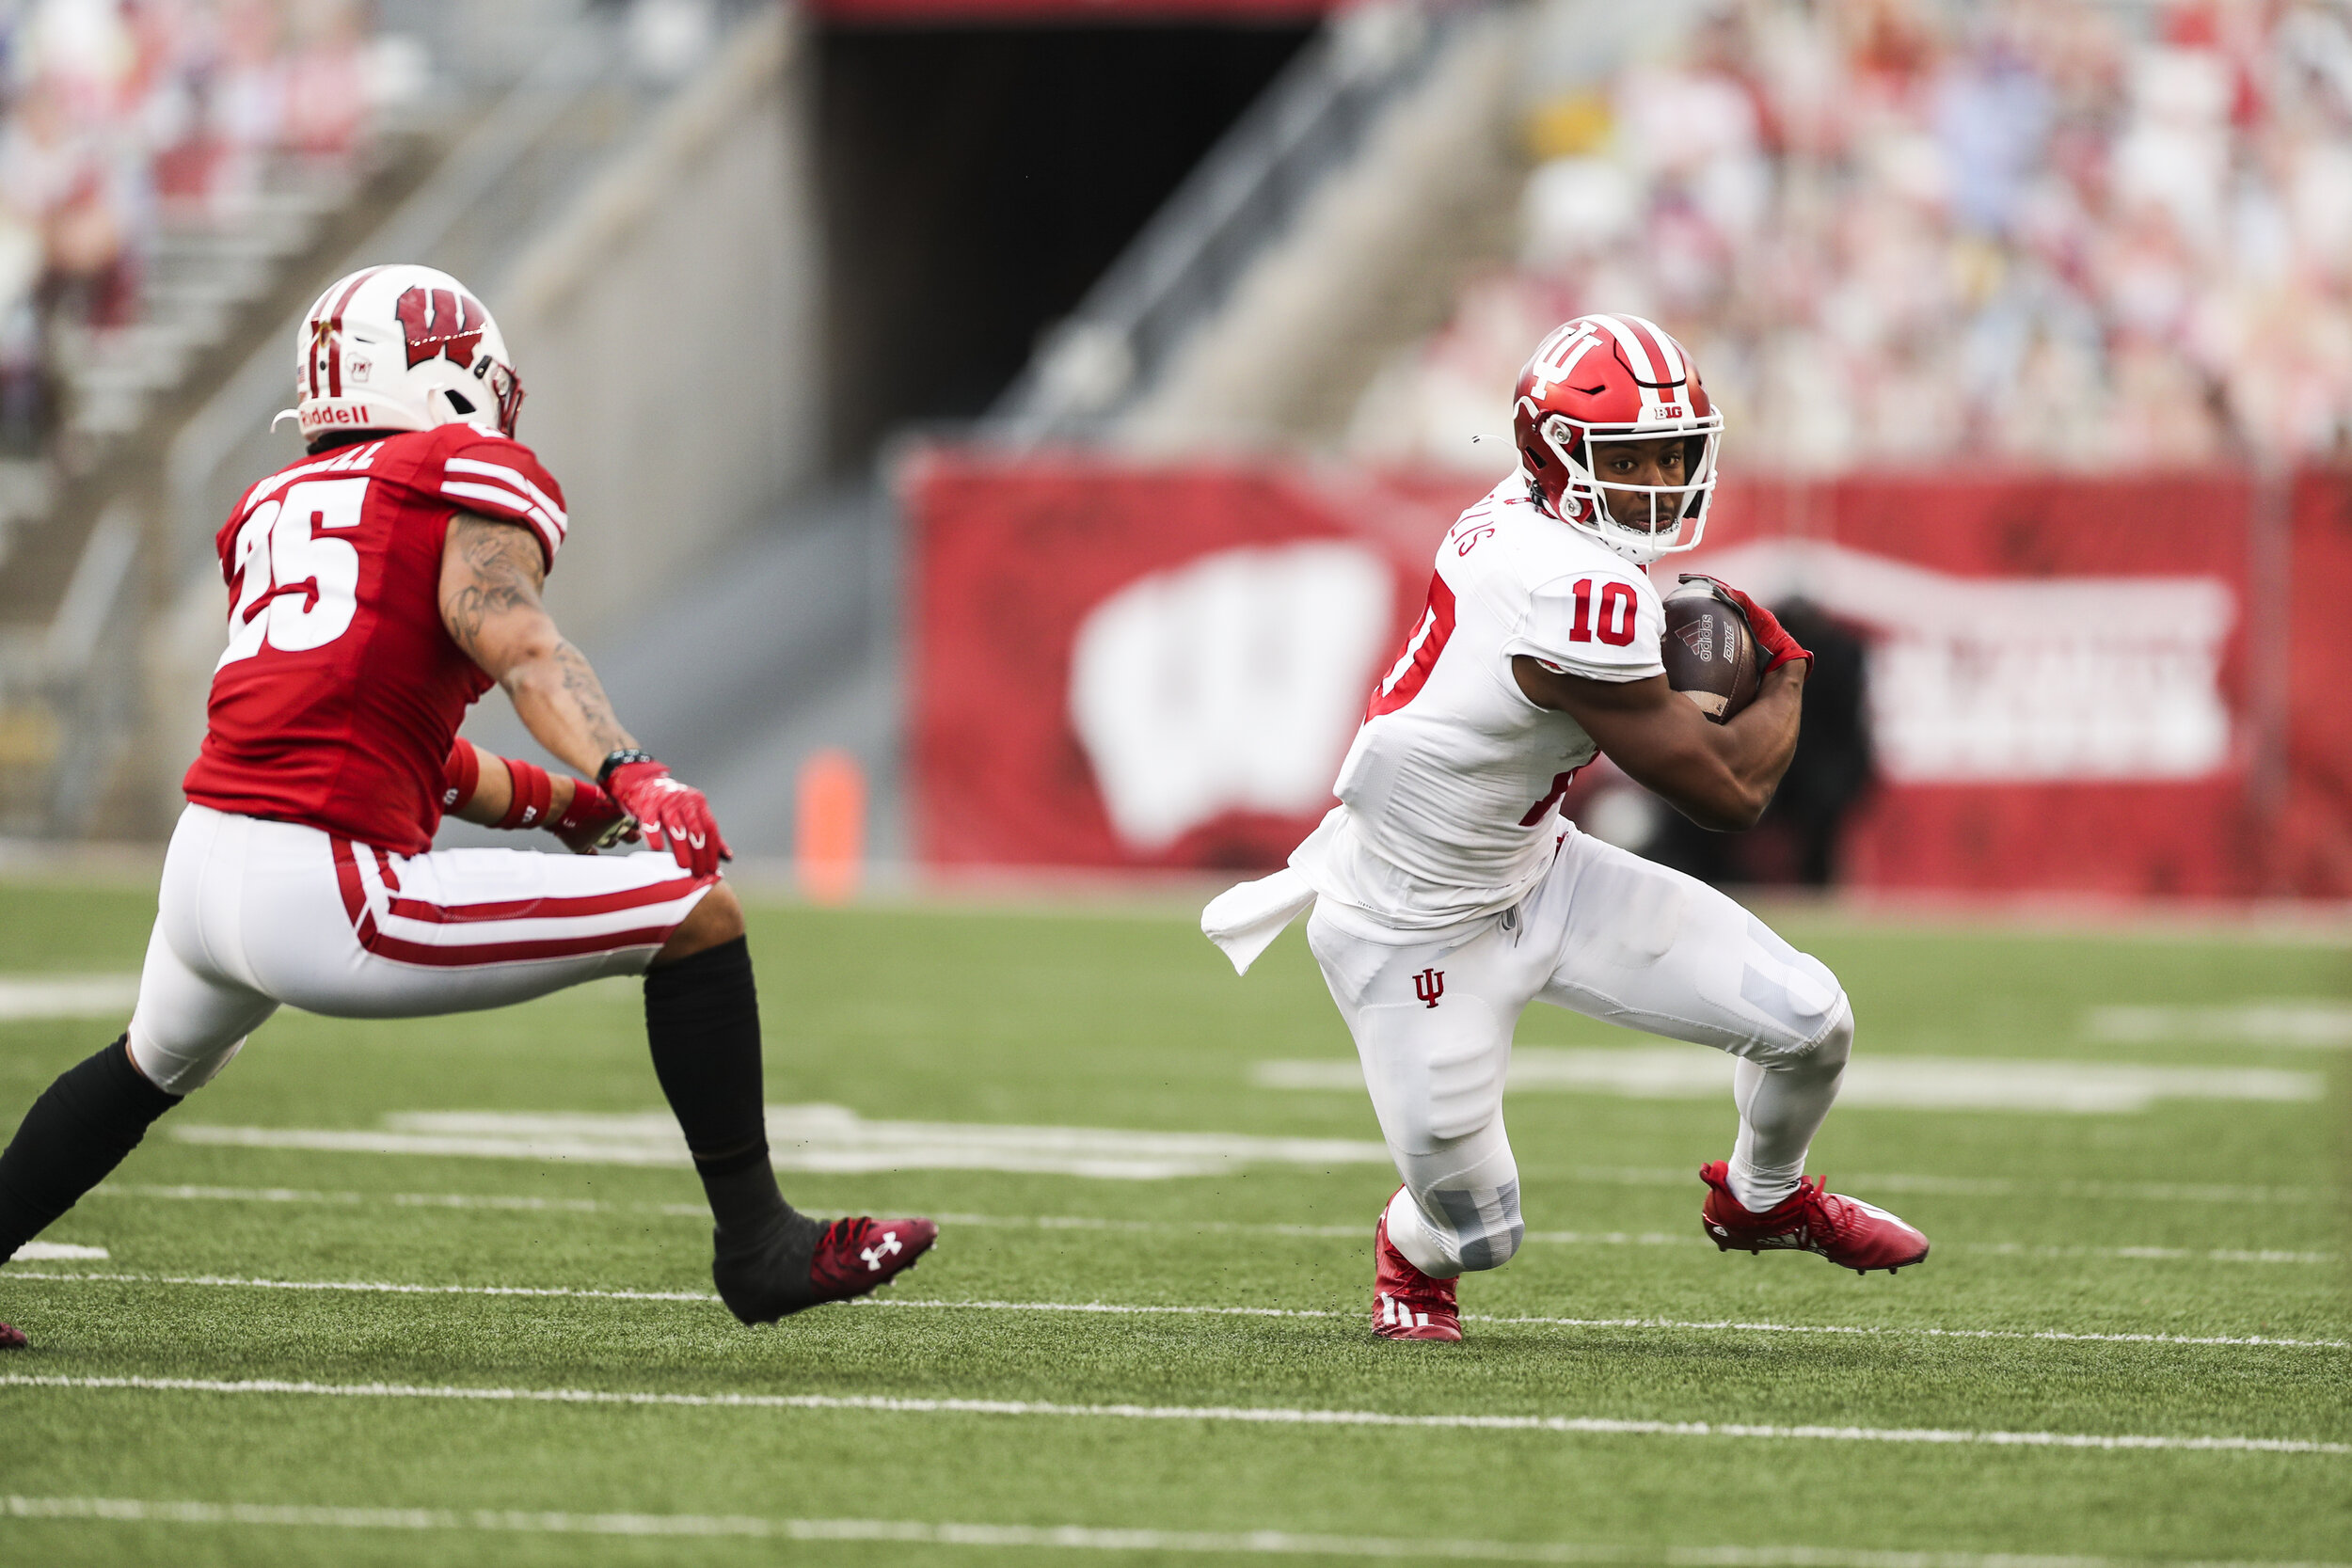 Iu Football Schedule 2022 Indiana's 2021 Football Schedule Finalized As Several Games Moved Around —  Hoosier Huddle